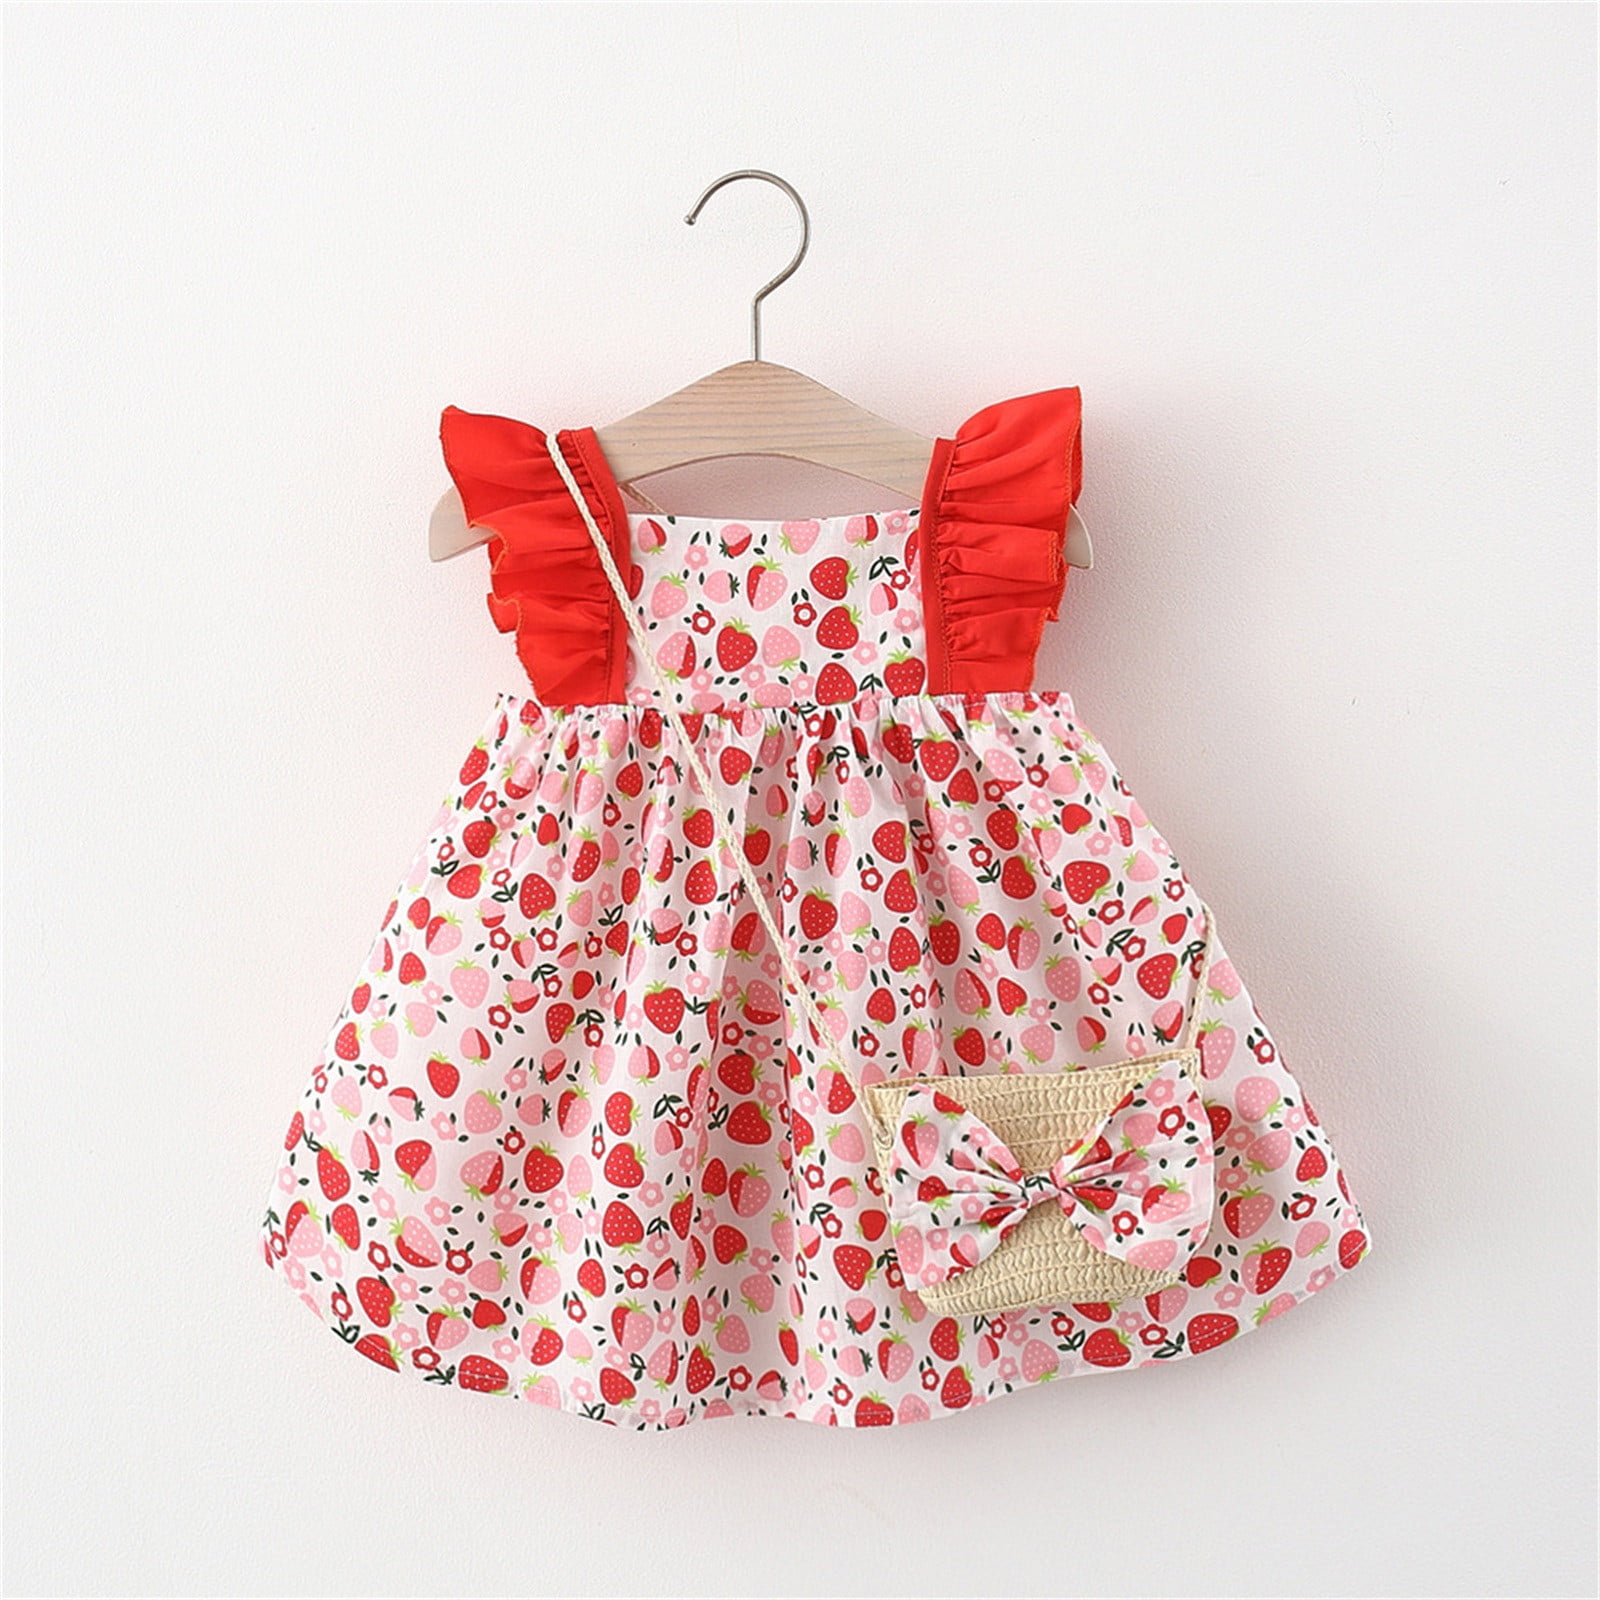 Dress up Clothes for Little Girls Girls Sweaters Size 10 12 Floral Princess  Beach Vacation Bag Ruffles Summer Dress Set Girls Party Dress for Baby